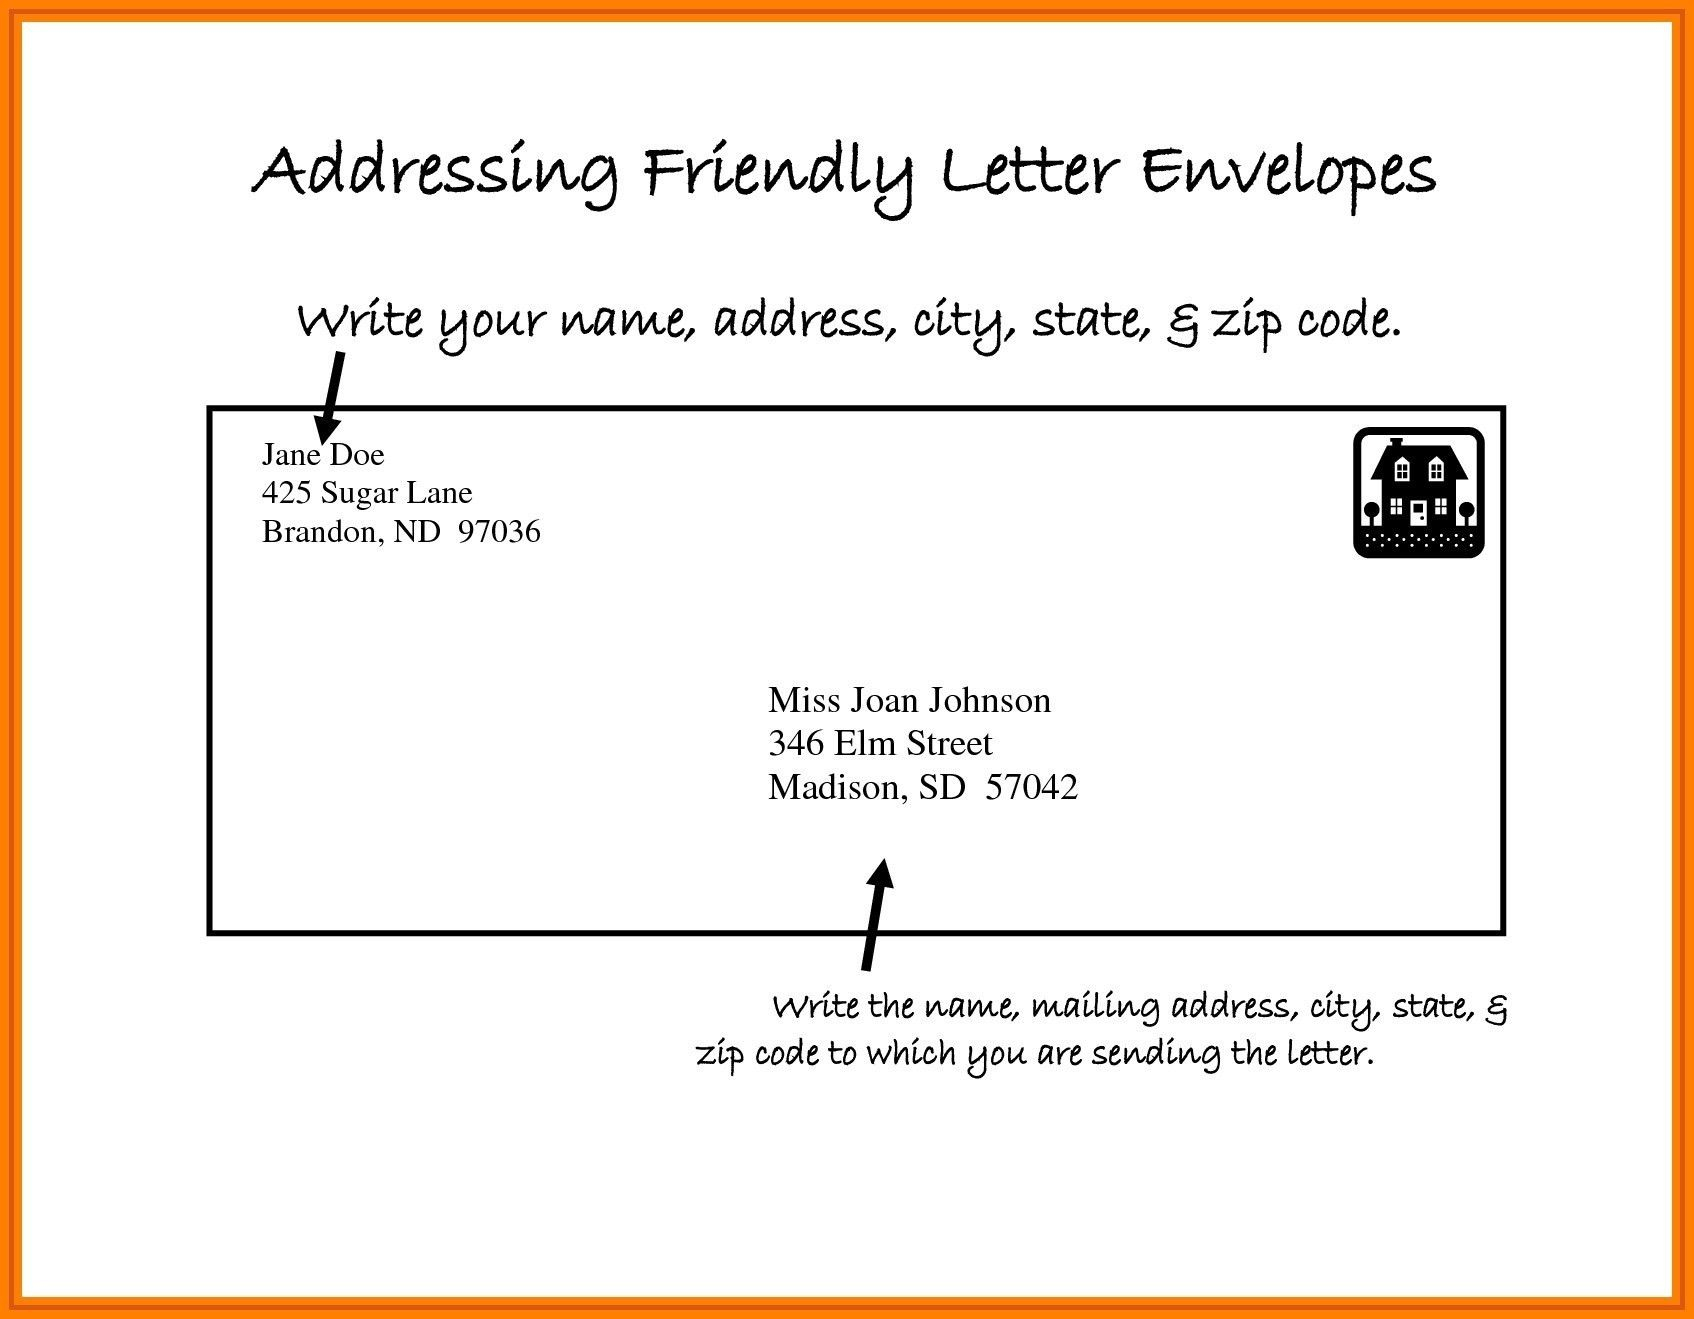 You Can See This New Business Letter Envelope Format 